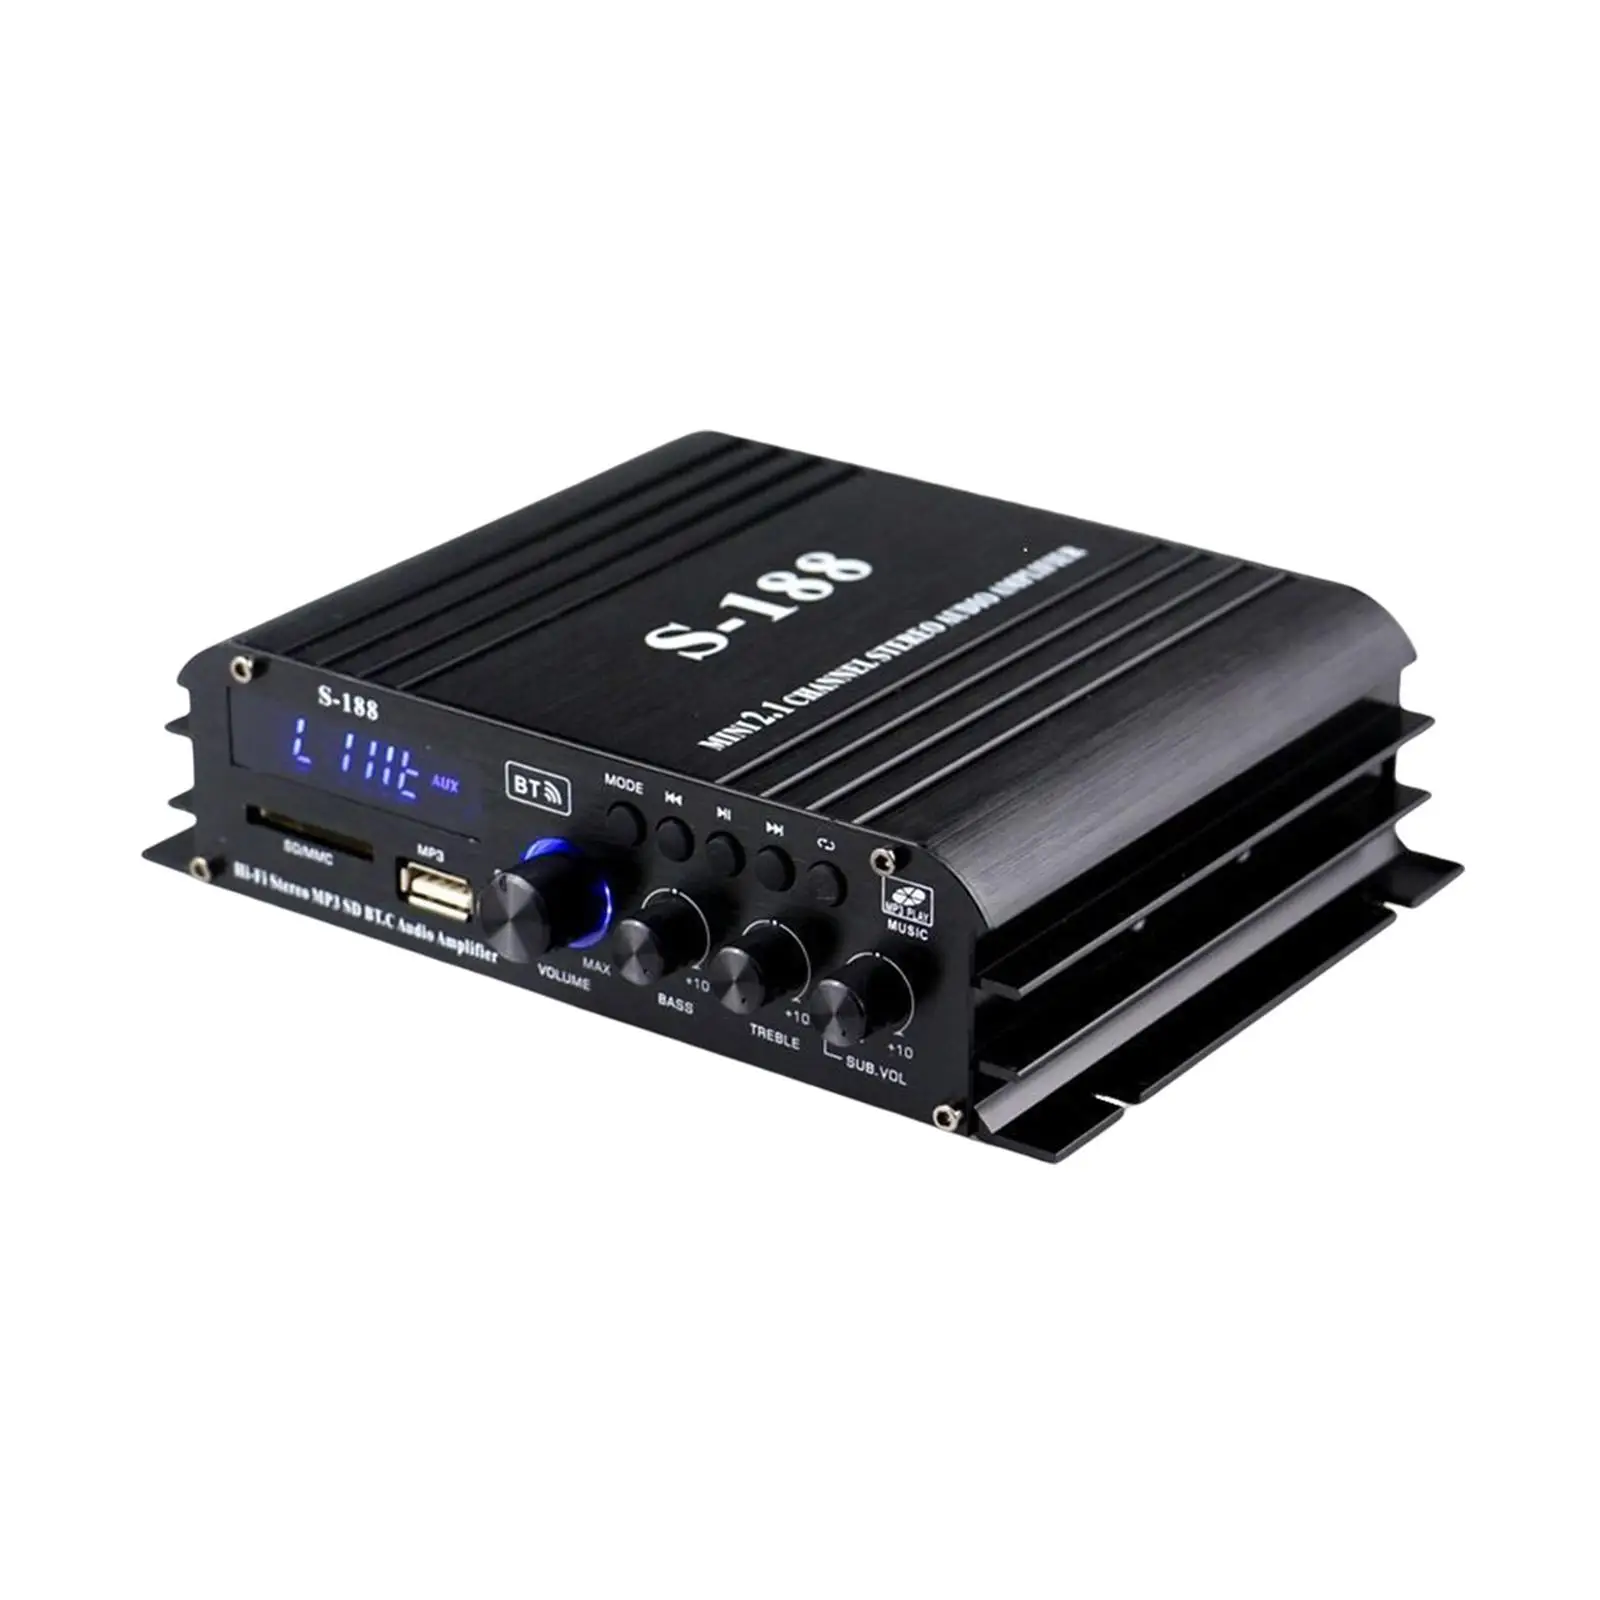 Car Vehicle Home Power Amplifier US Adapter Plug Lightweight Compact Sturdy 17.6cmx12.5cmx4.5cm Low Noise 2.1CH 12V Power Supply